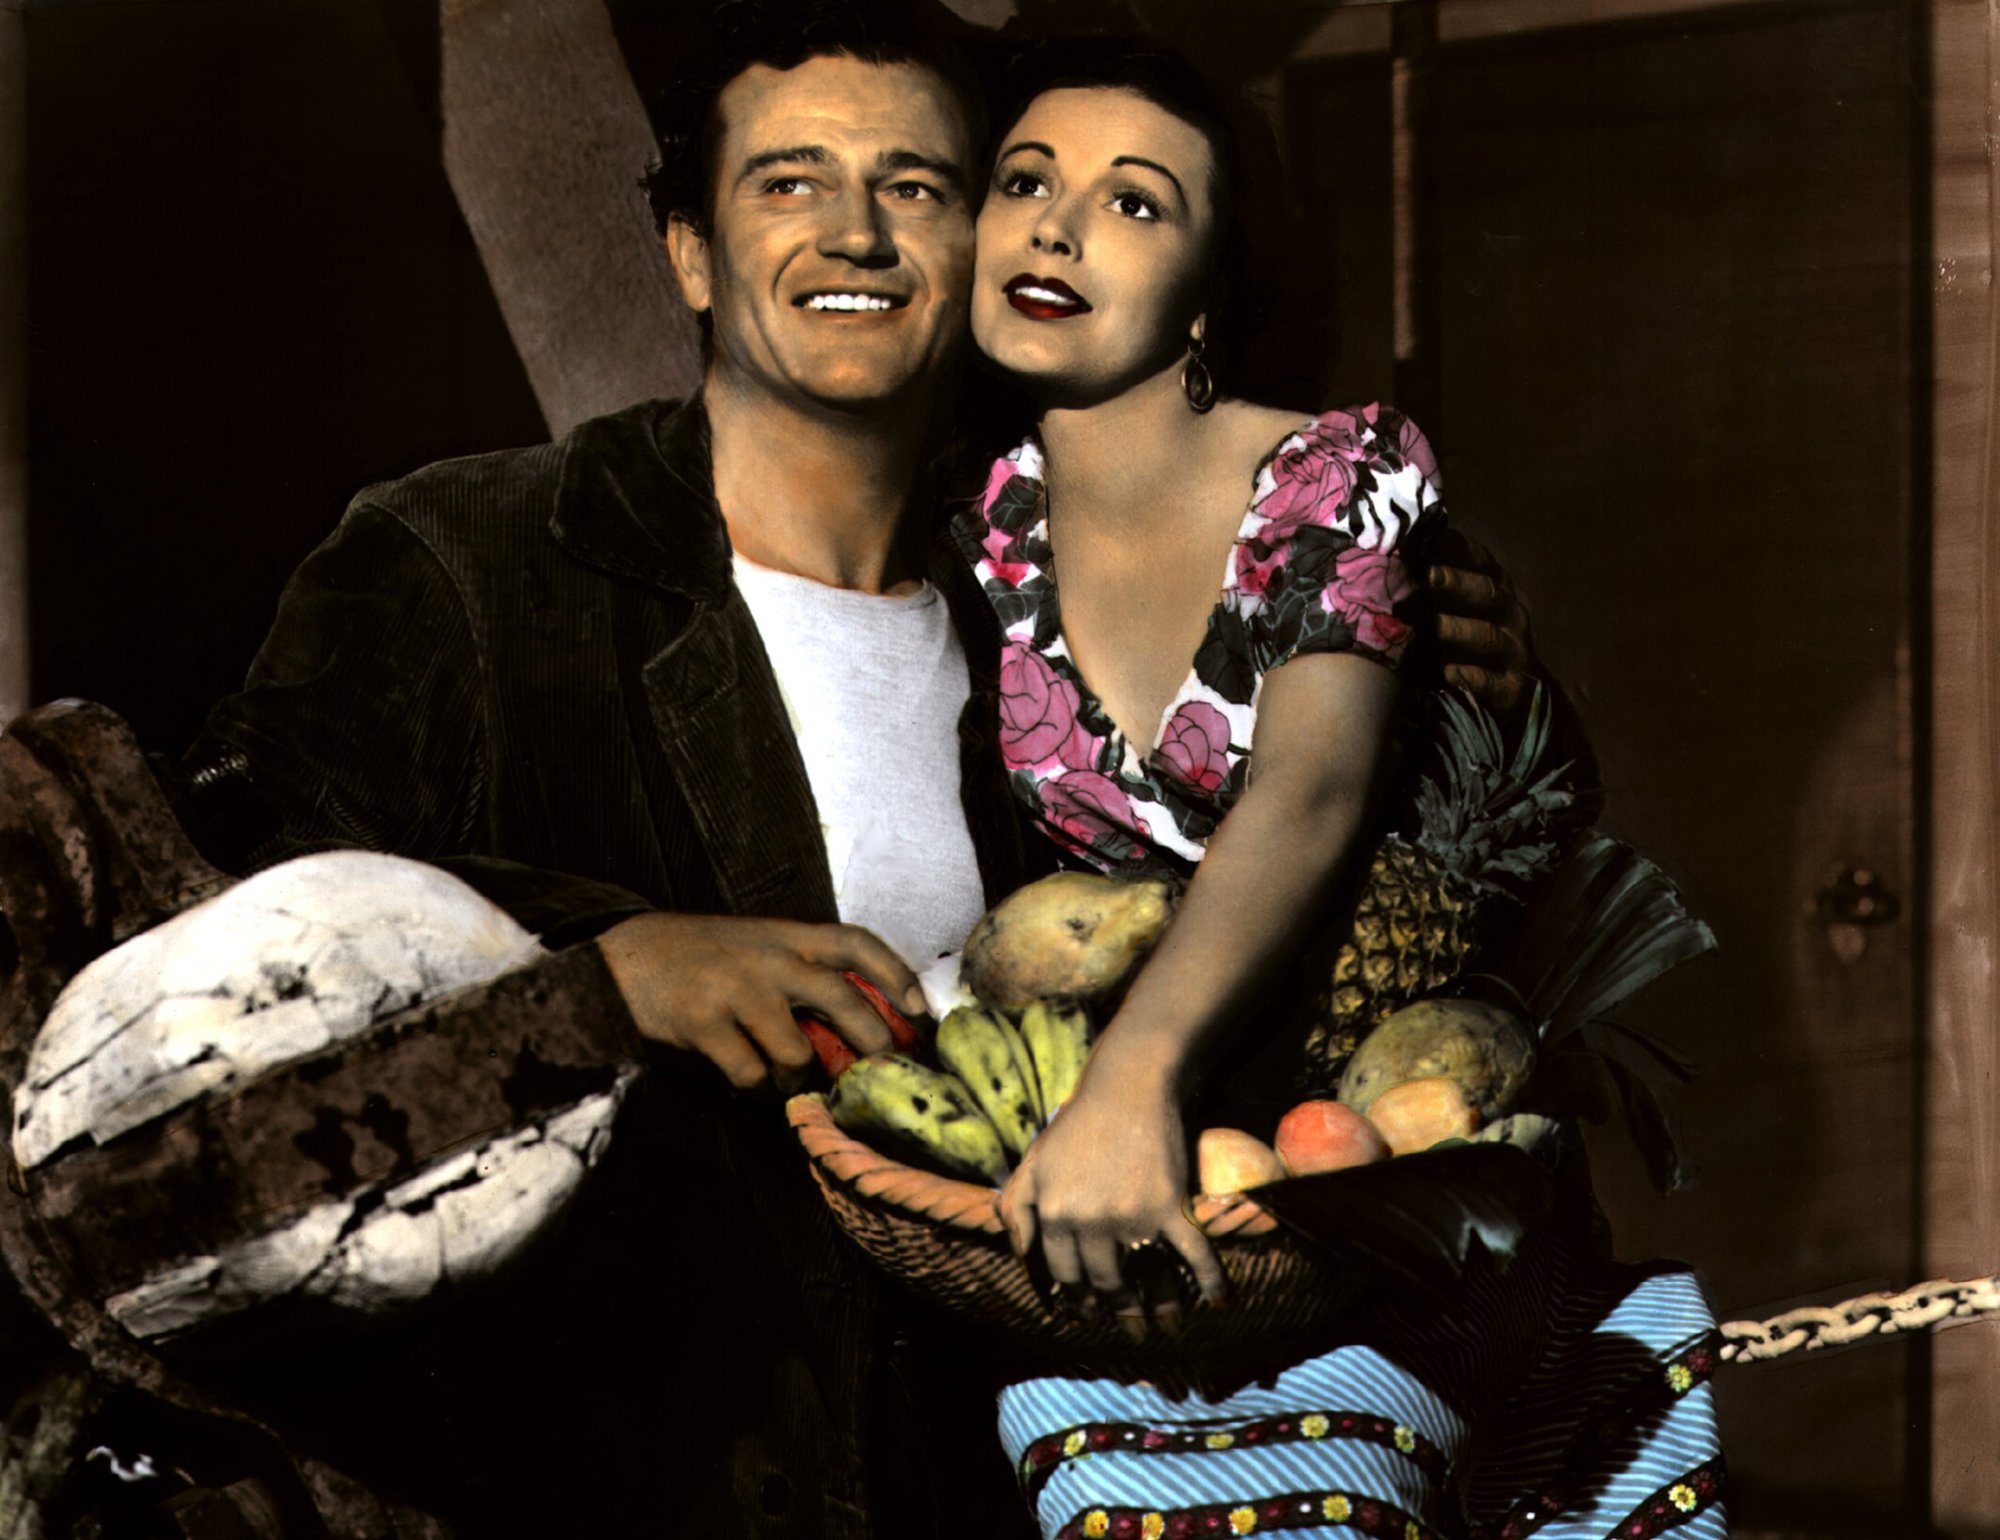 'The Long Voyage Home' John Wayne and Mildred Natwick. Natwick is holding a basket of fruit with her face against Wayne's face.